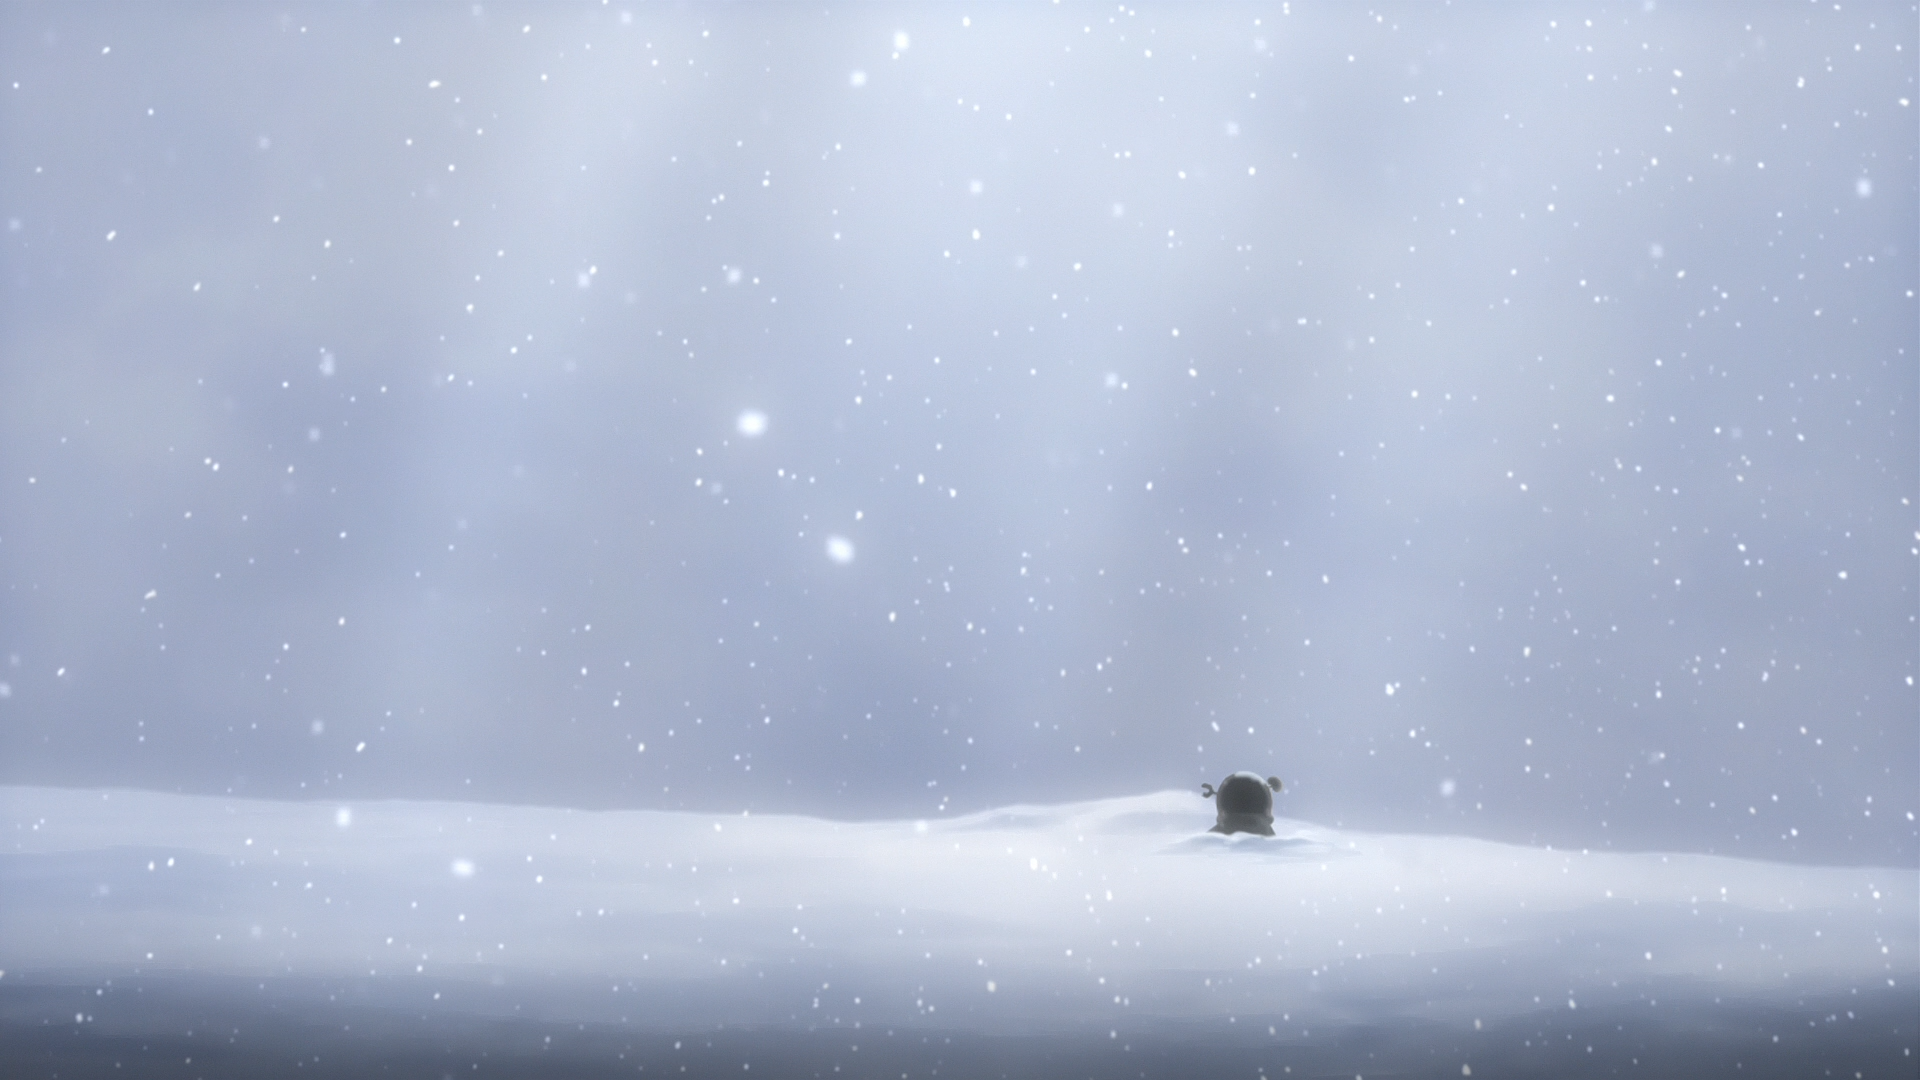 snowy scene with some sort of robot embedded in the snow 1920x1080